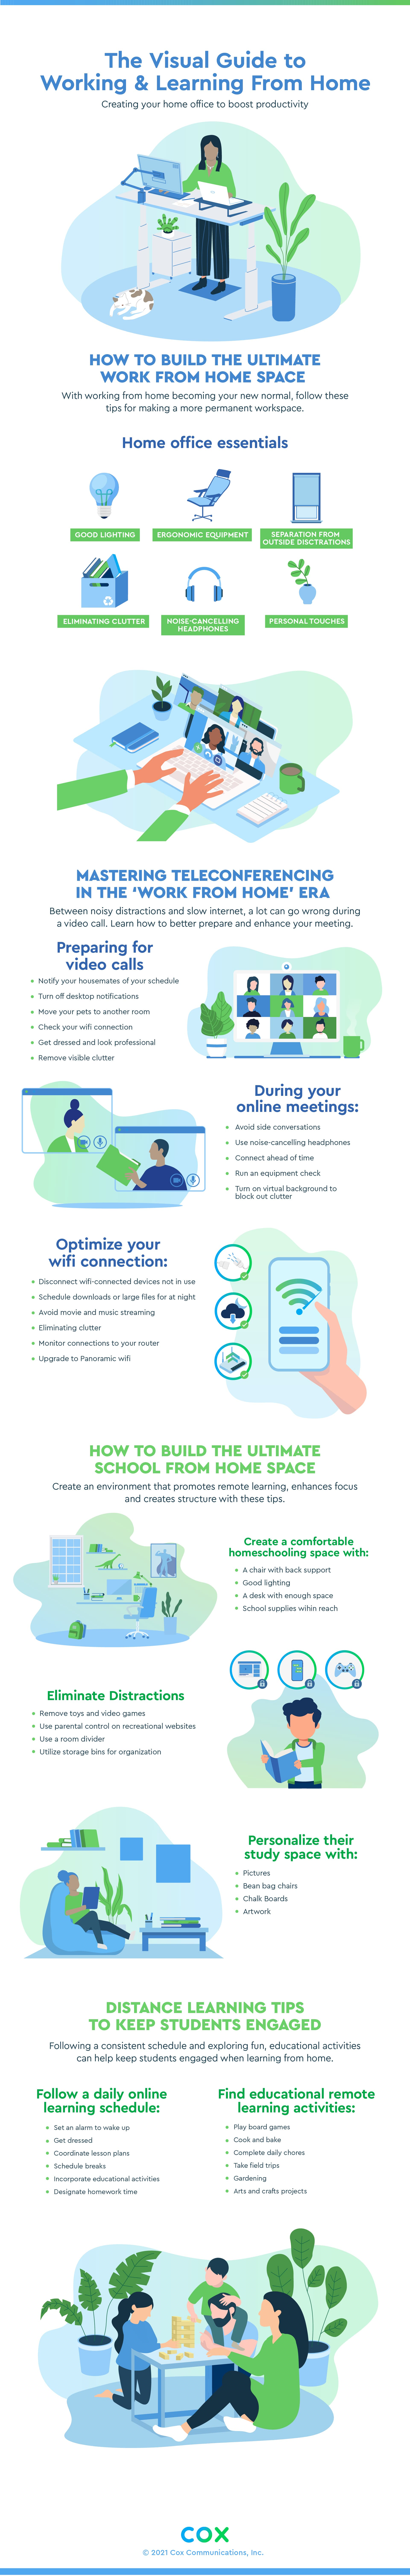 The Visual Guide to Working & Learning from Home (Infographic)